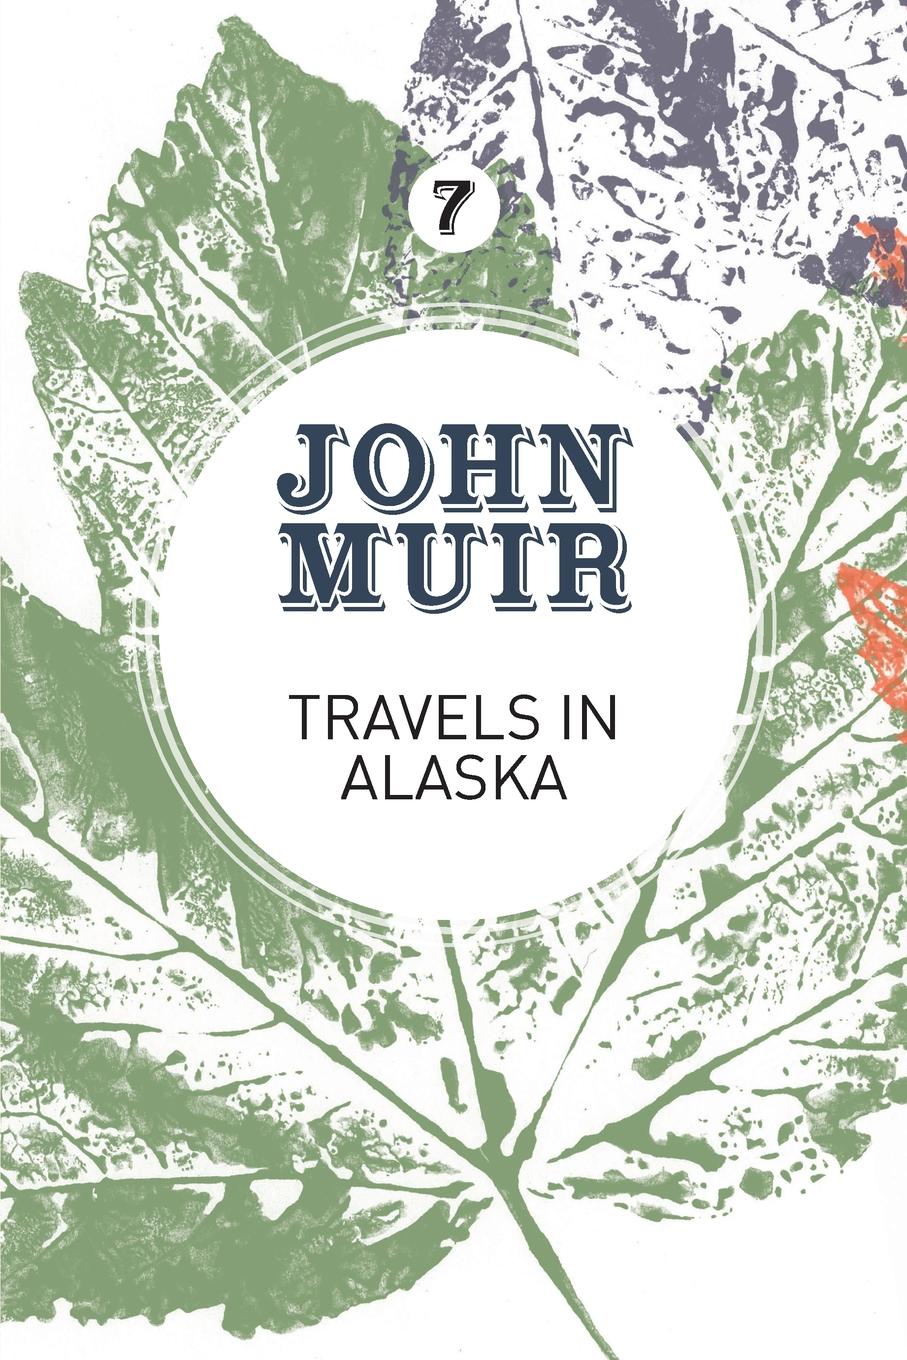 Travels in Alaska. Three immersions into Alaskan wilderness and culture